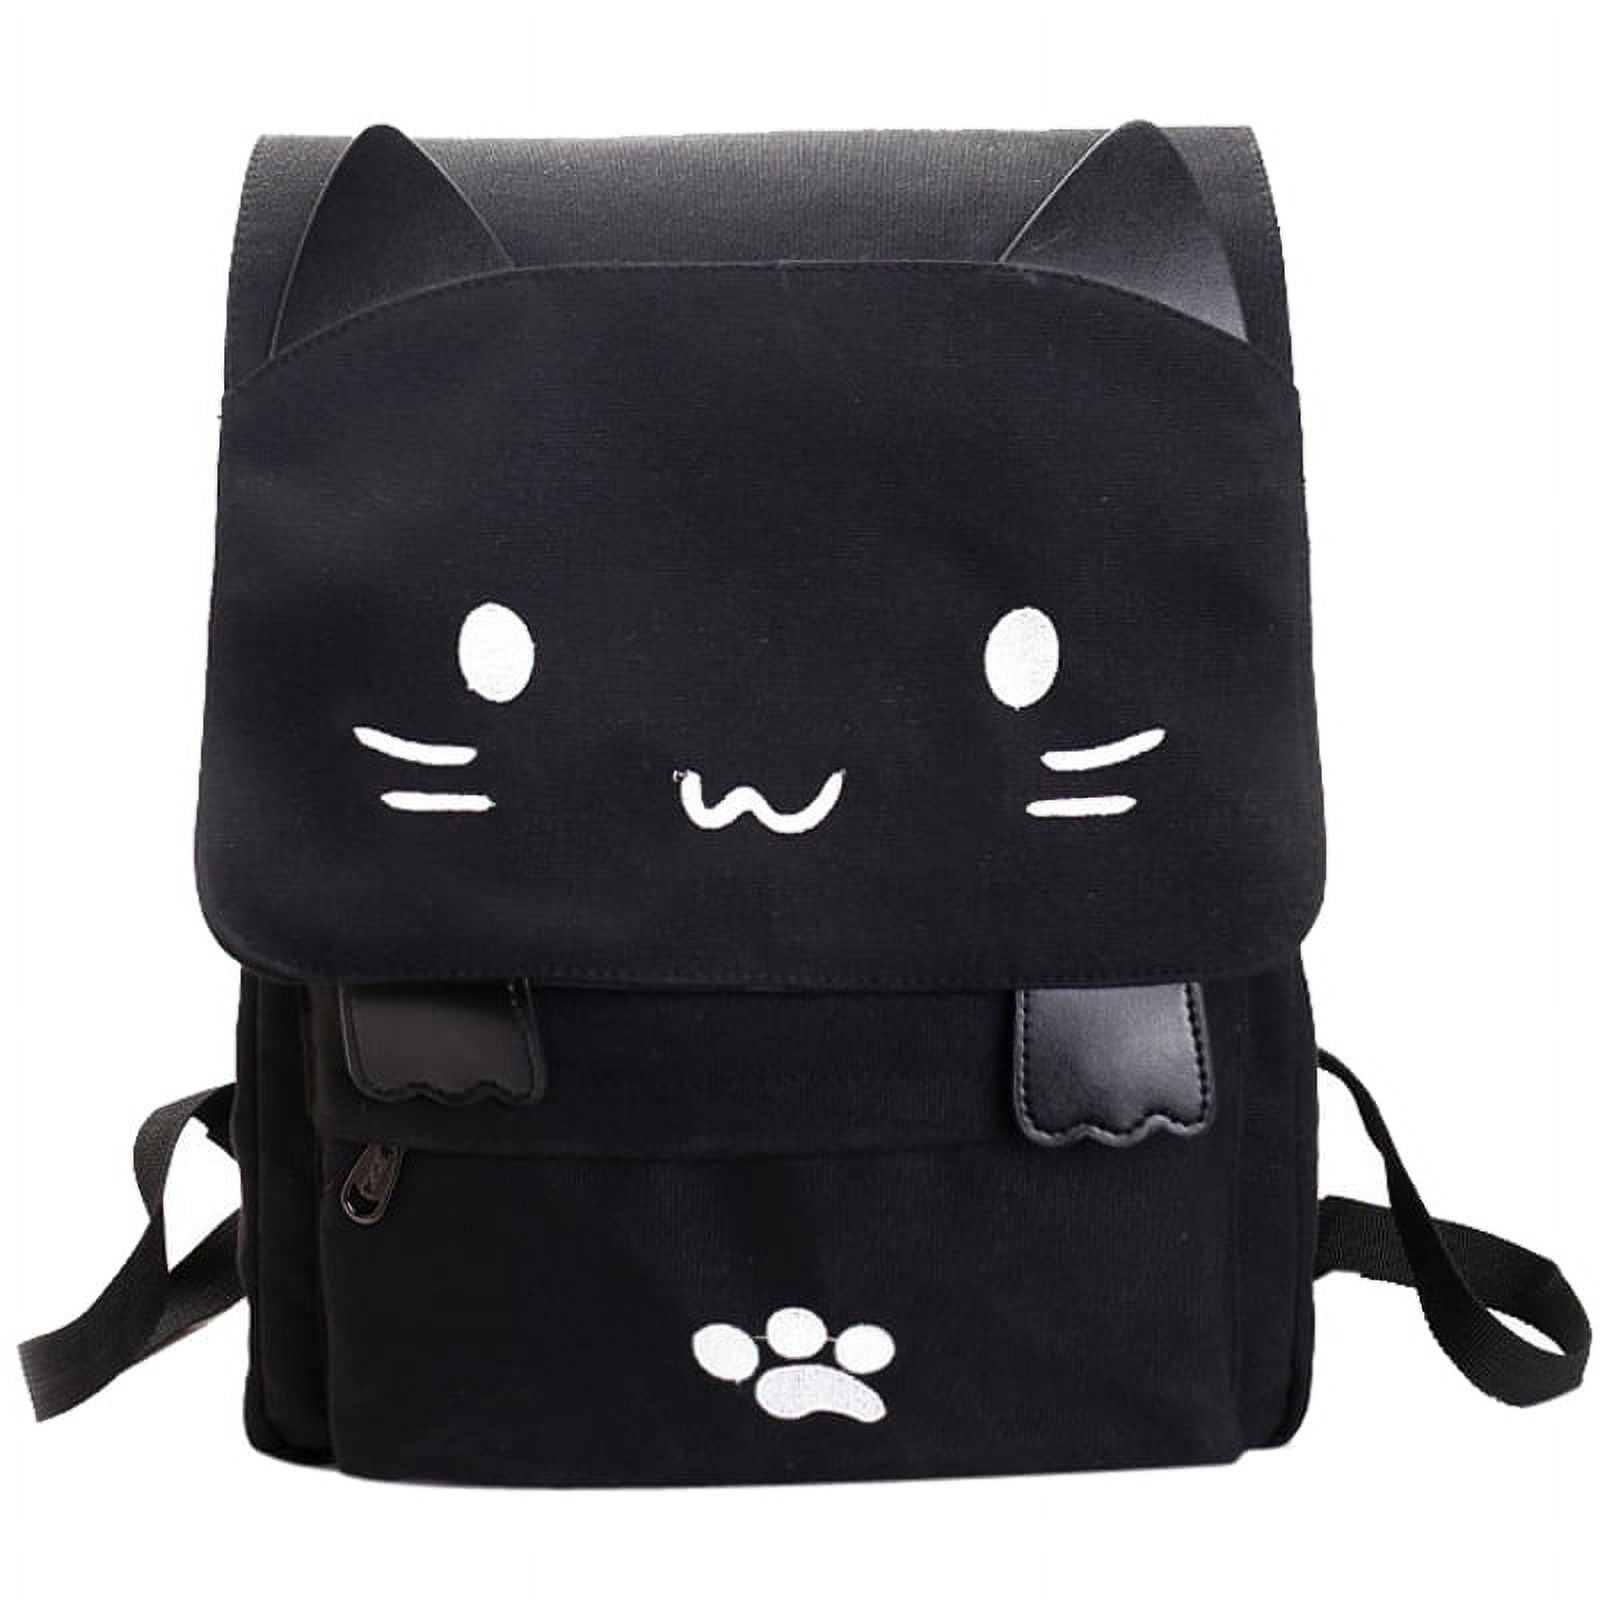 Cat bags: do they good or not? My girl wants such for her cat and I'm  searching for some real experiences, also the bag suggestions (if they will  be) would be cool. :